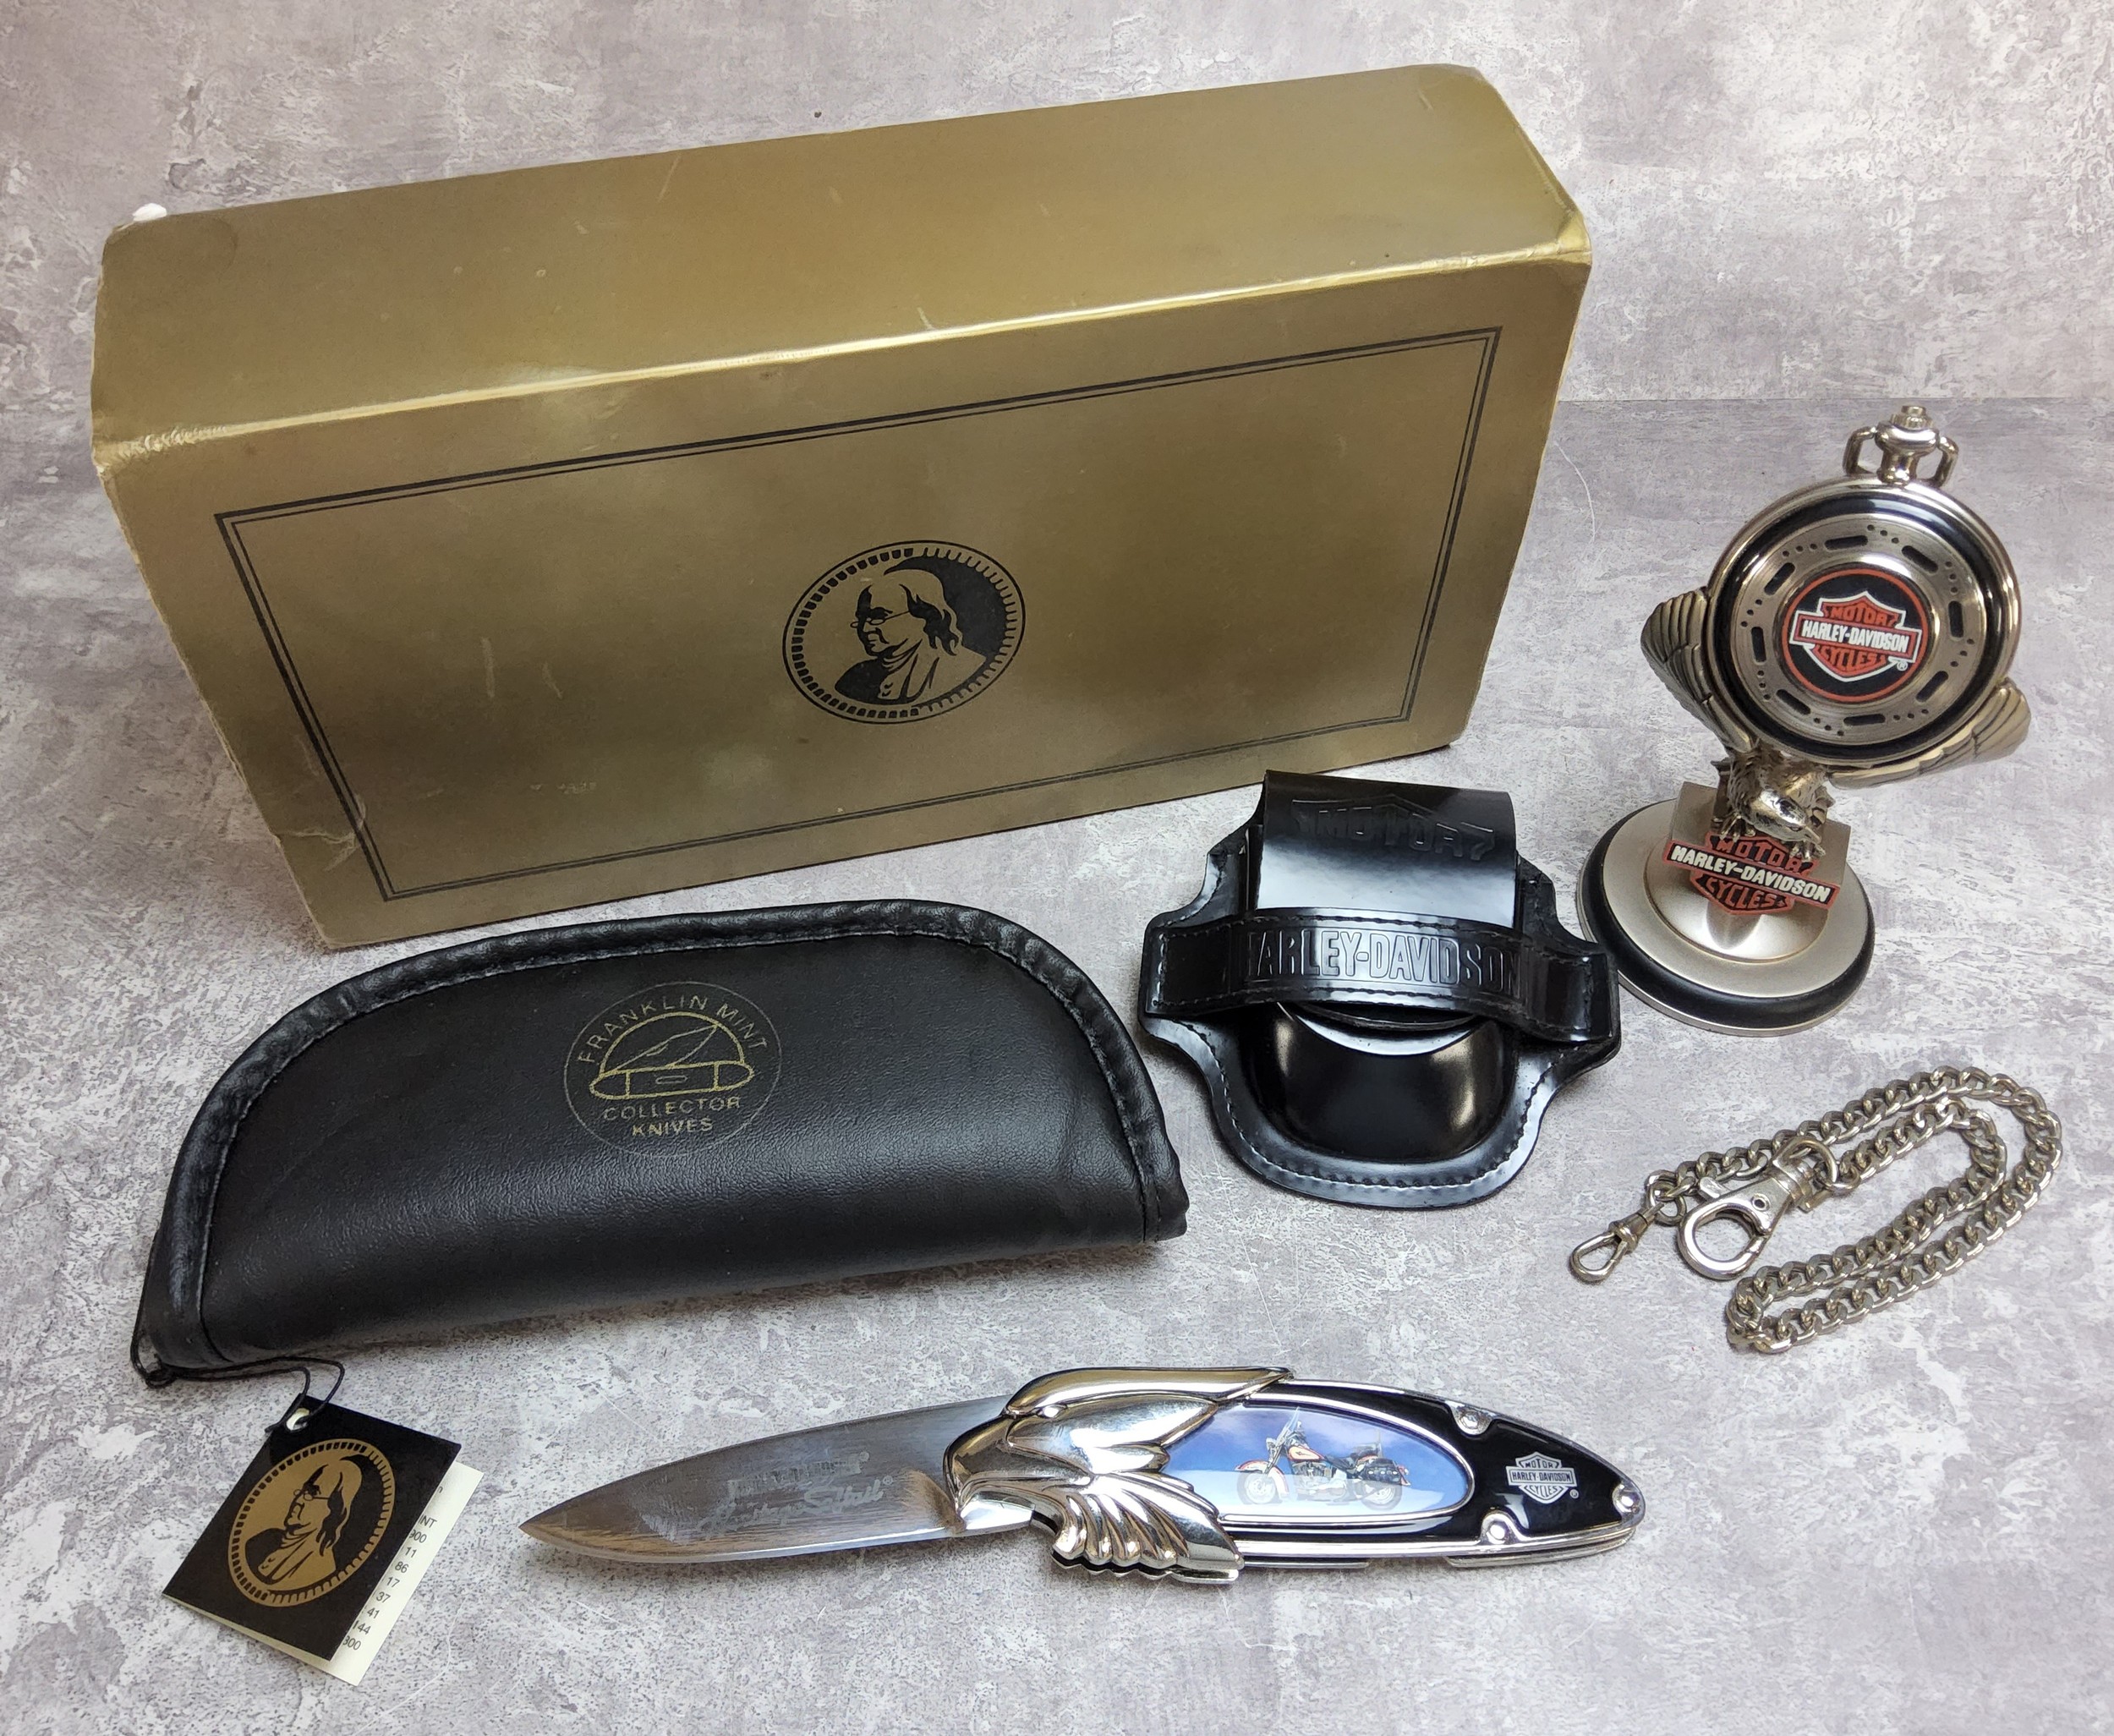 A Franklin Mint Collectors Knives Harley Davidson penknife with pouch and packaging; a Franklin Mint